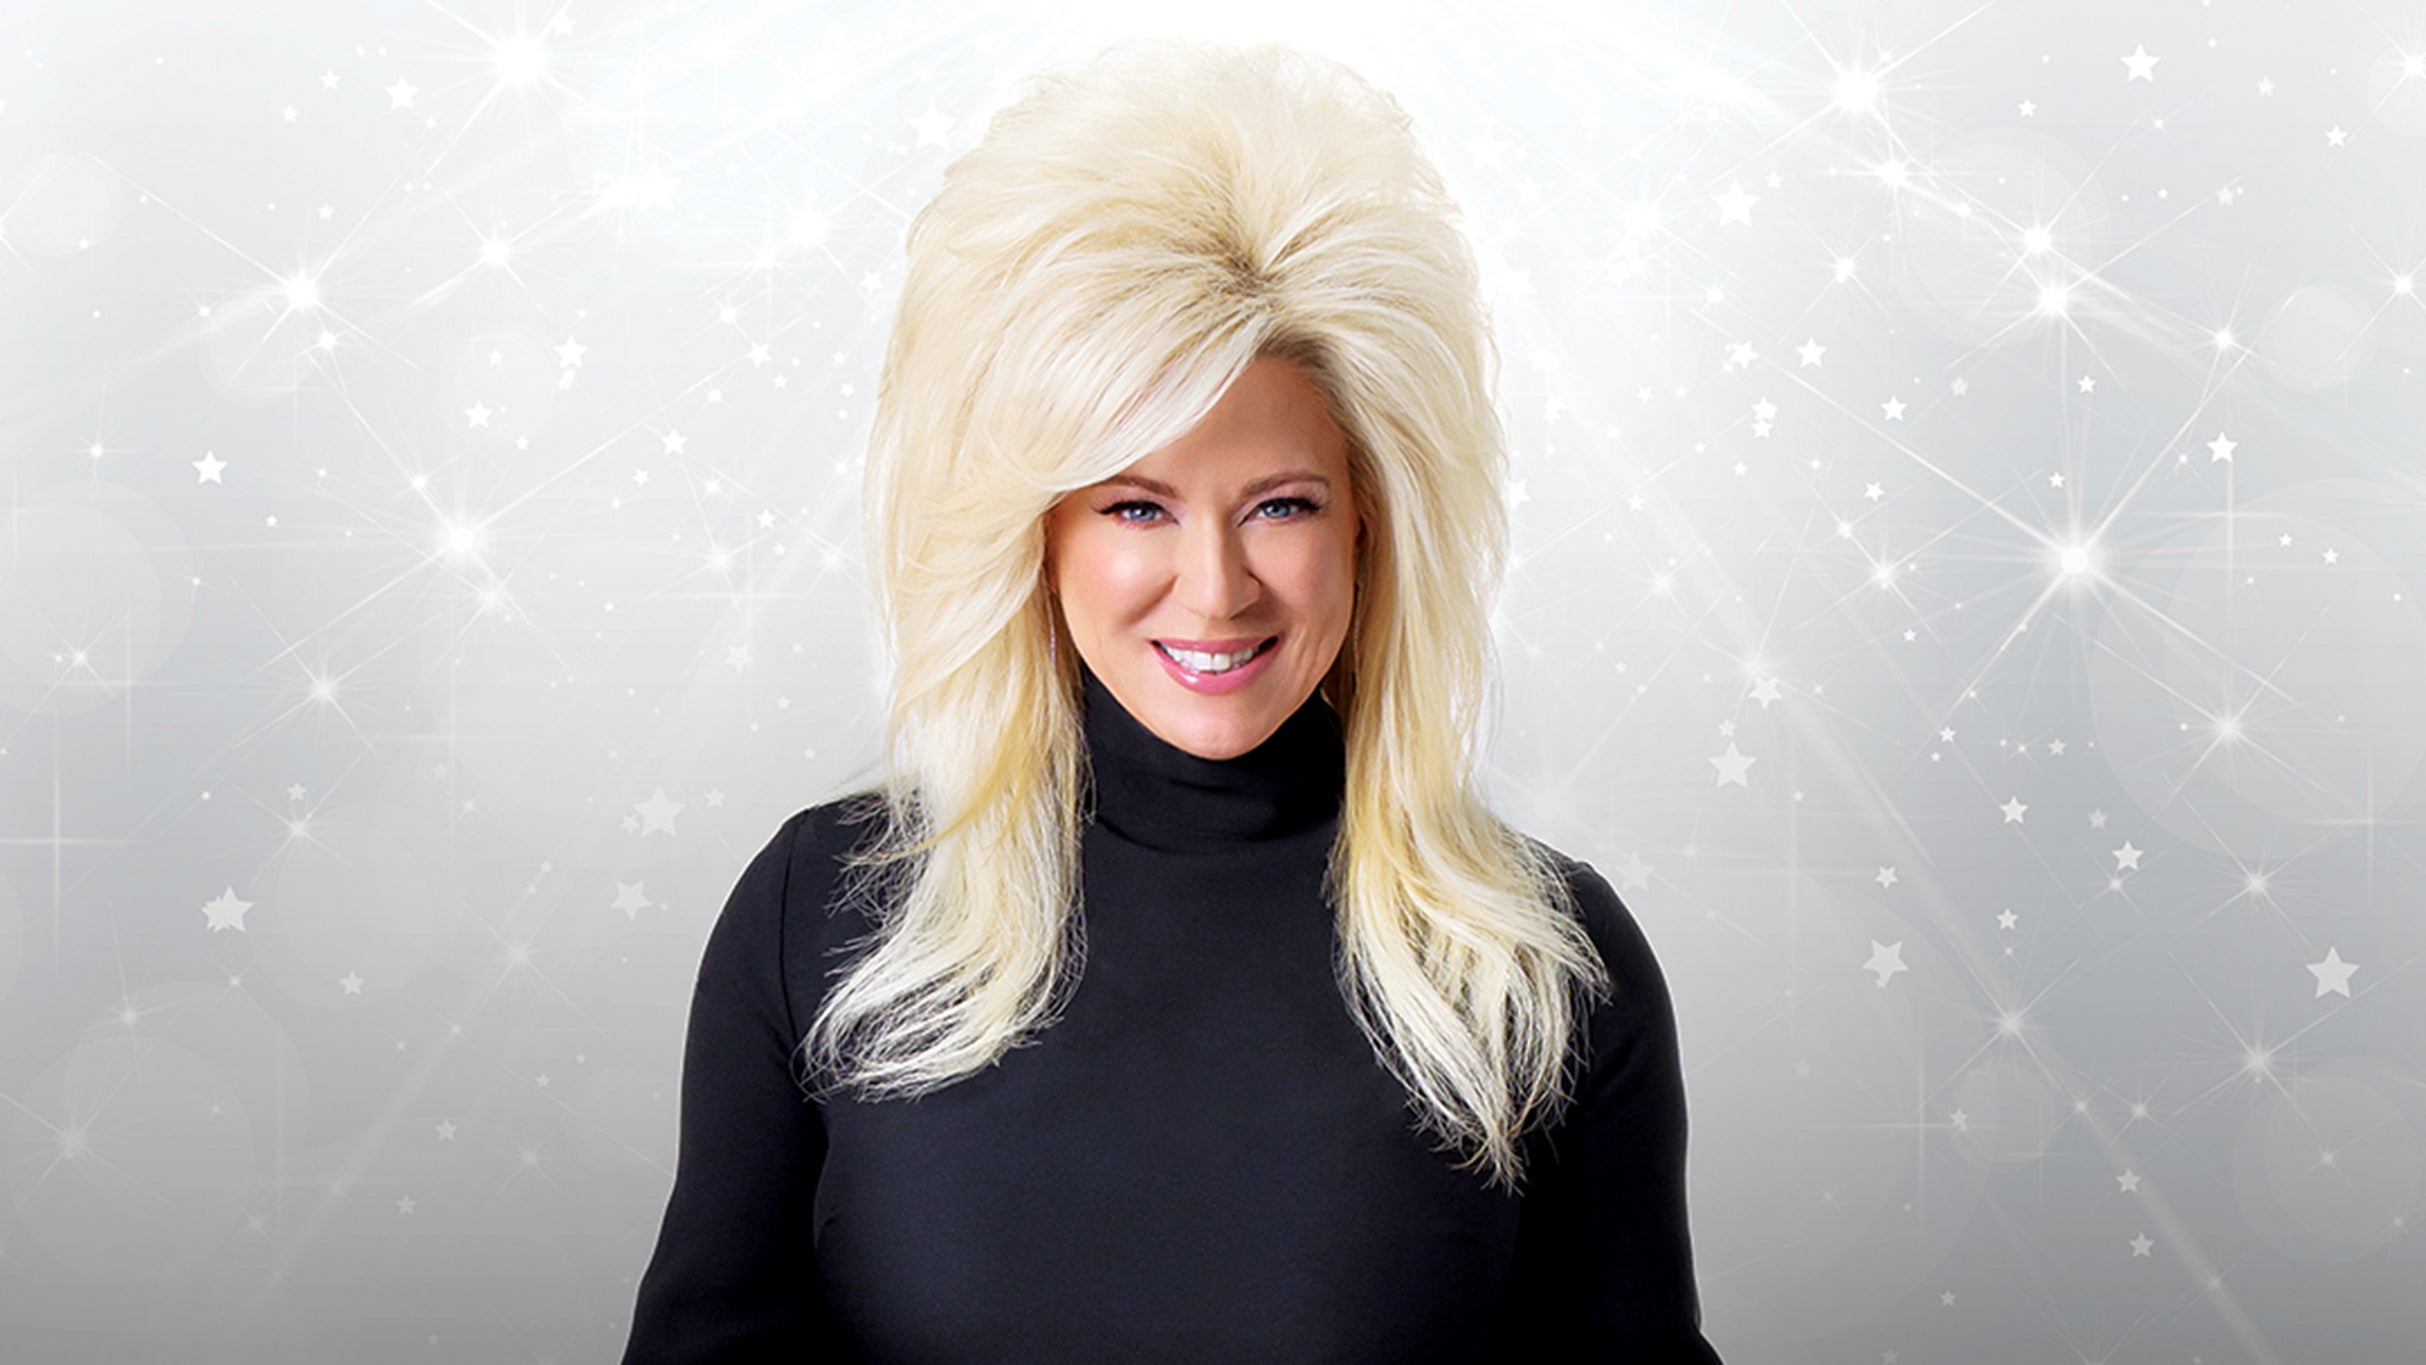 Theresa Caputo Live! The Experience in Bethlehem promo photo for Fan Club presale offer code